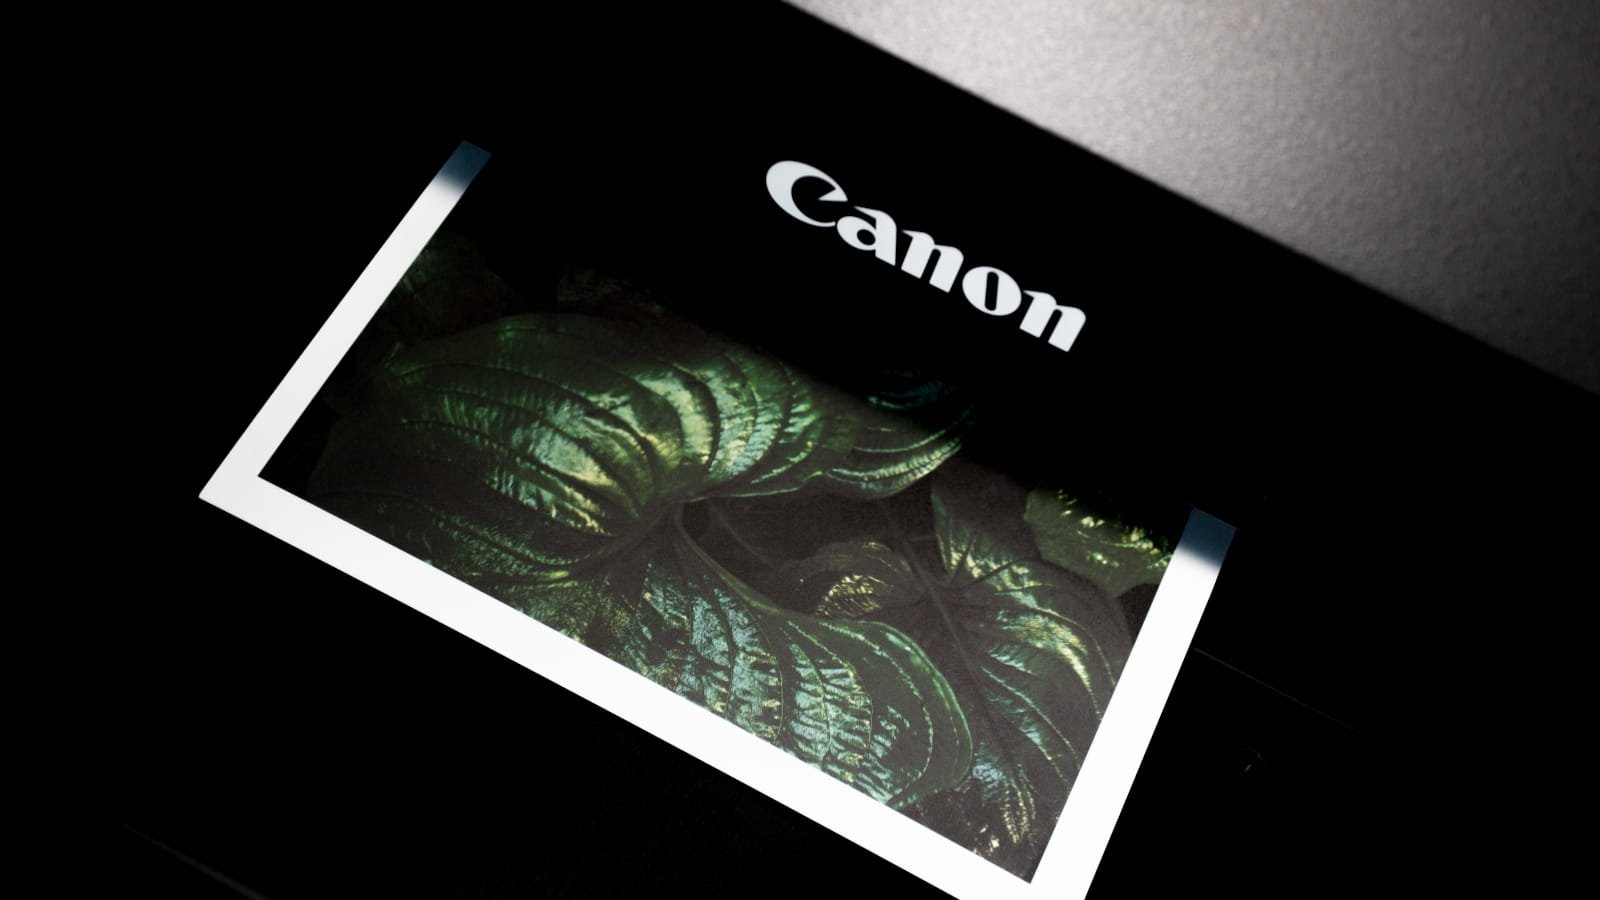 Canon warns of Wi-Fi security risks when discarding inkjet printers – Source: www.bleepingcomputer.com